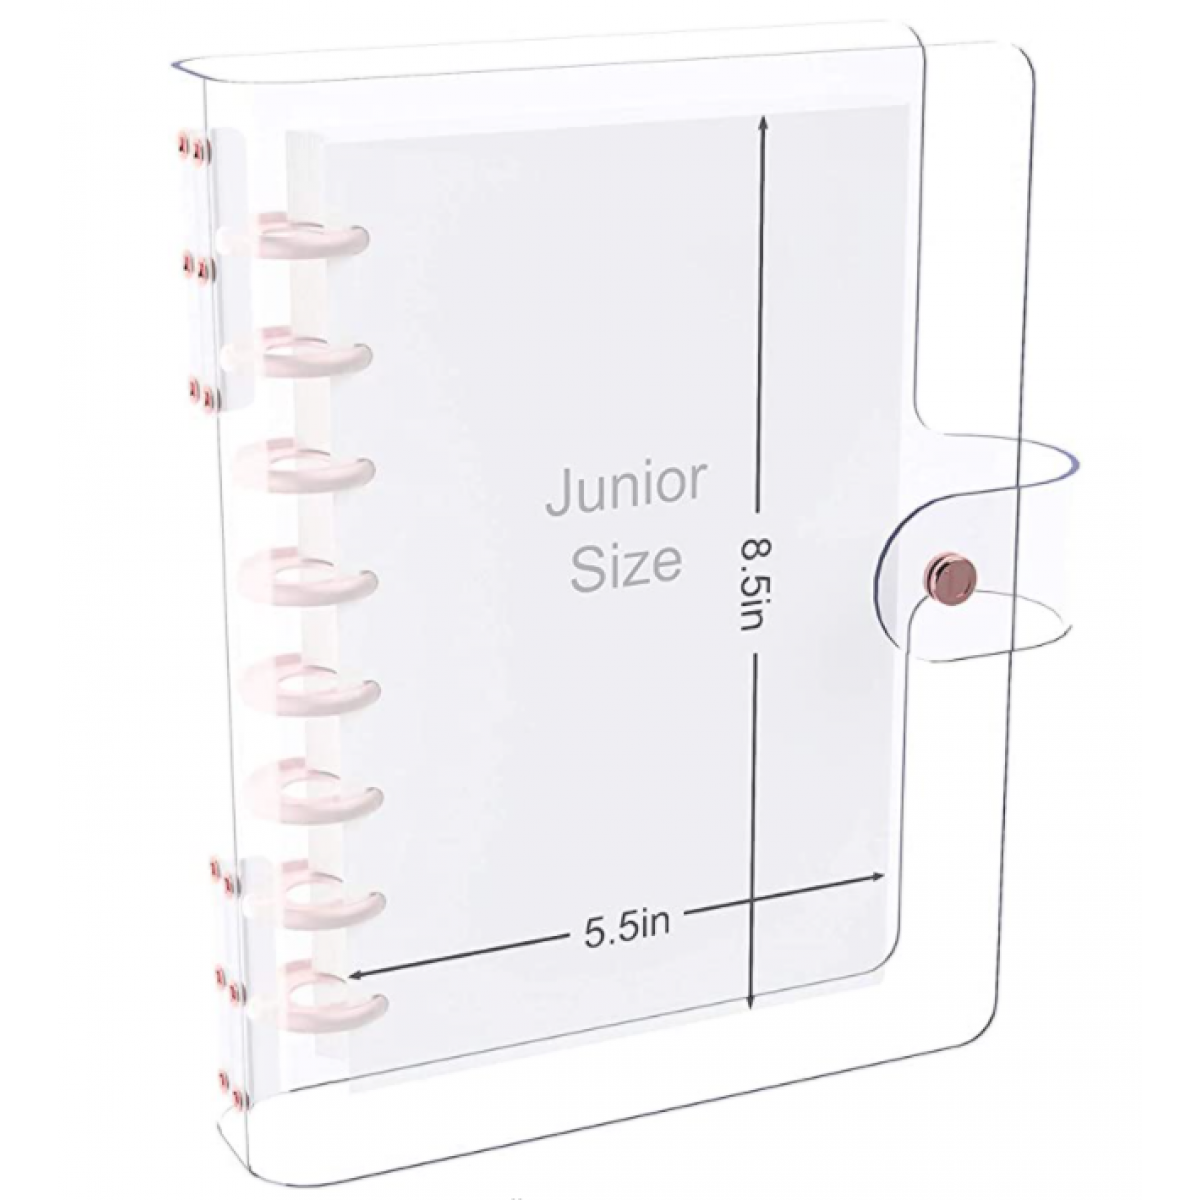 DISCAGENDA CLARITY CLEAR SEE THROUGH PVC PLANNER COVER - DISCBOUND, A5 SIZE